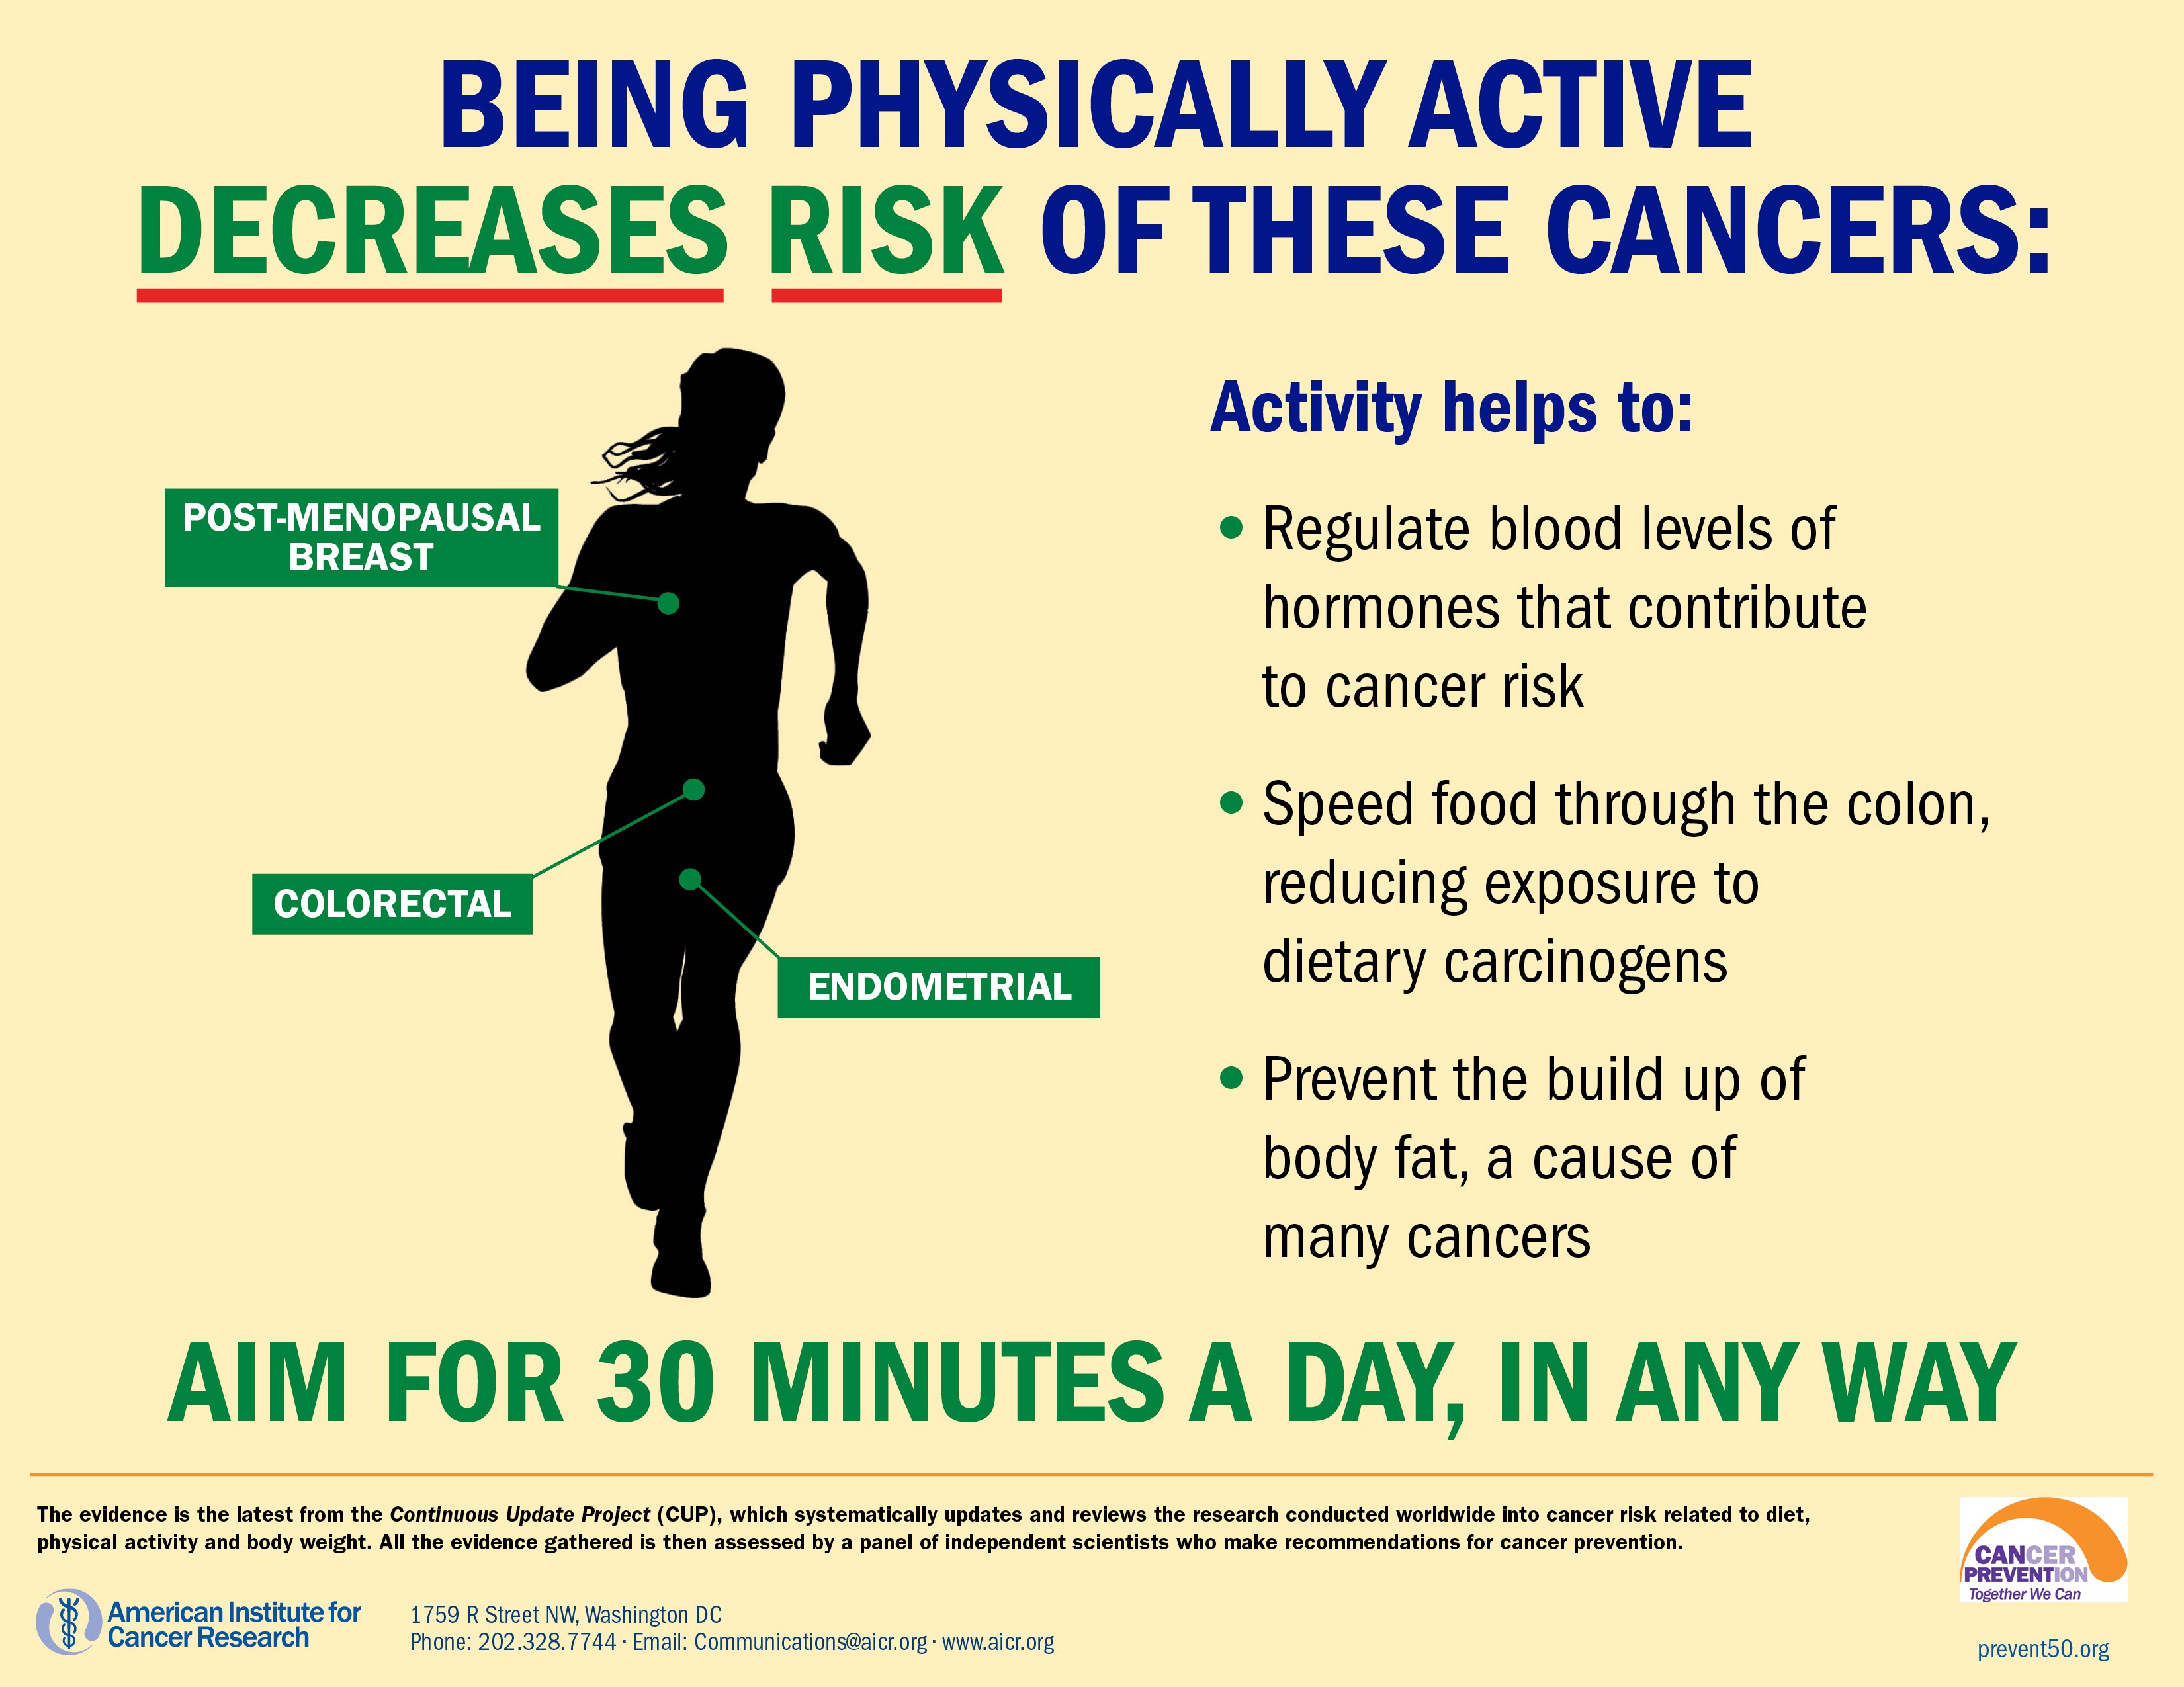 Walking and yoga 'can cut risk of cancer spreading or returning', Cancer